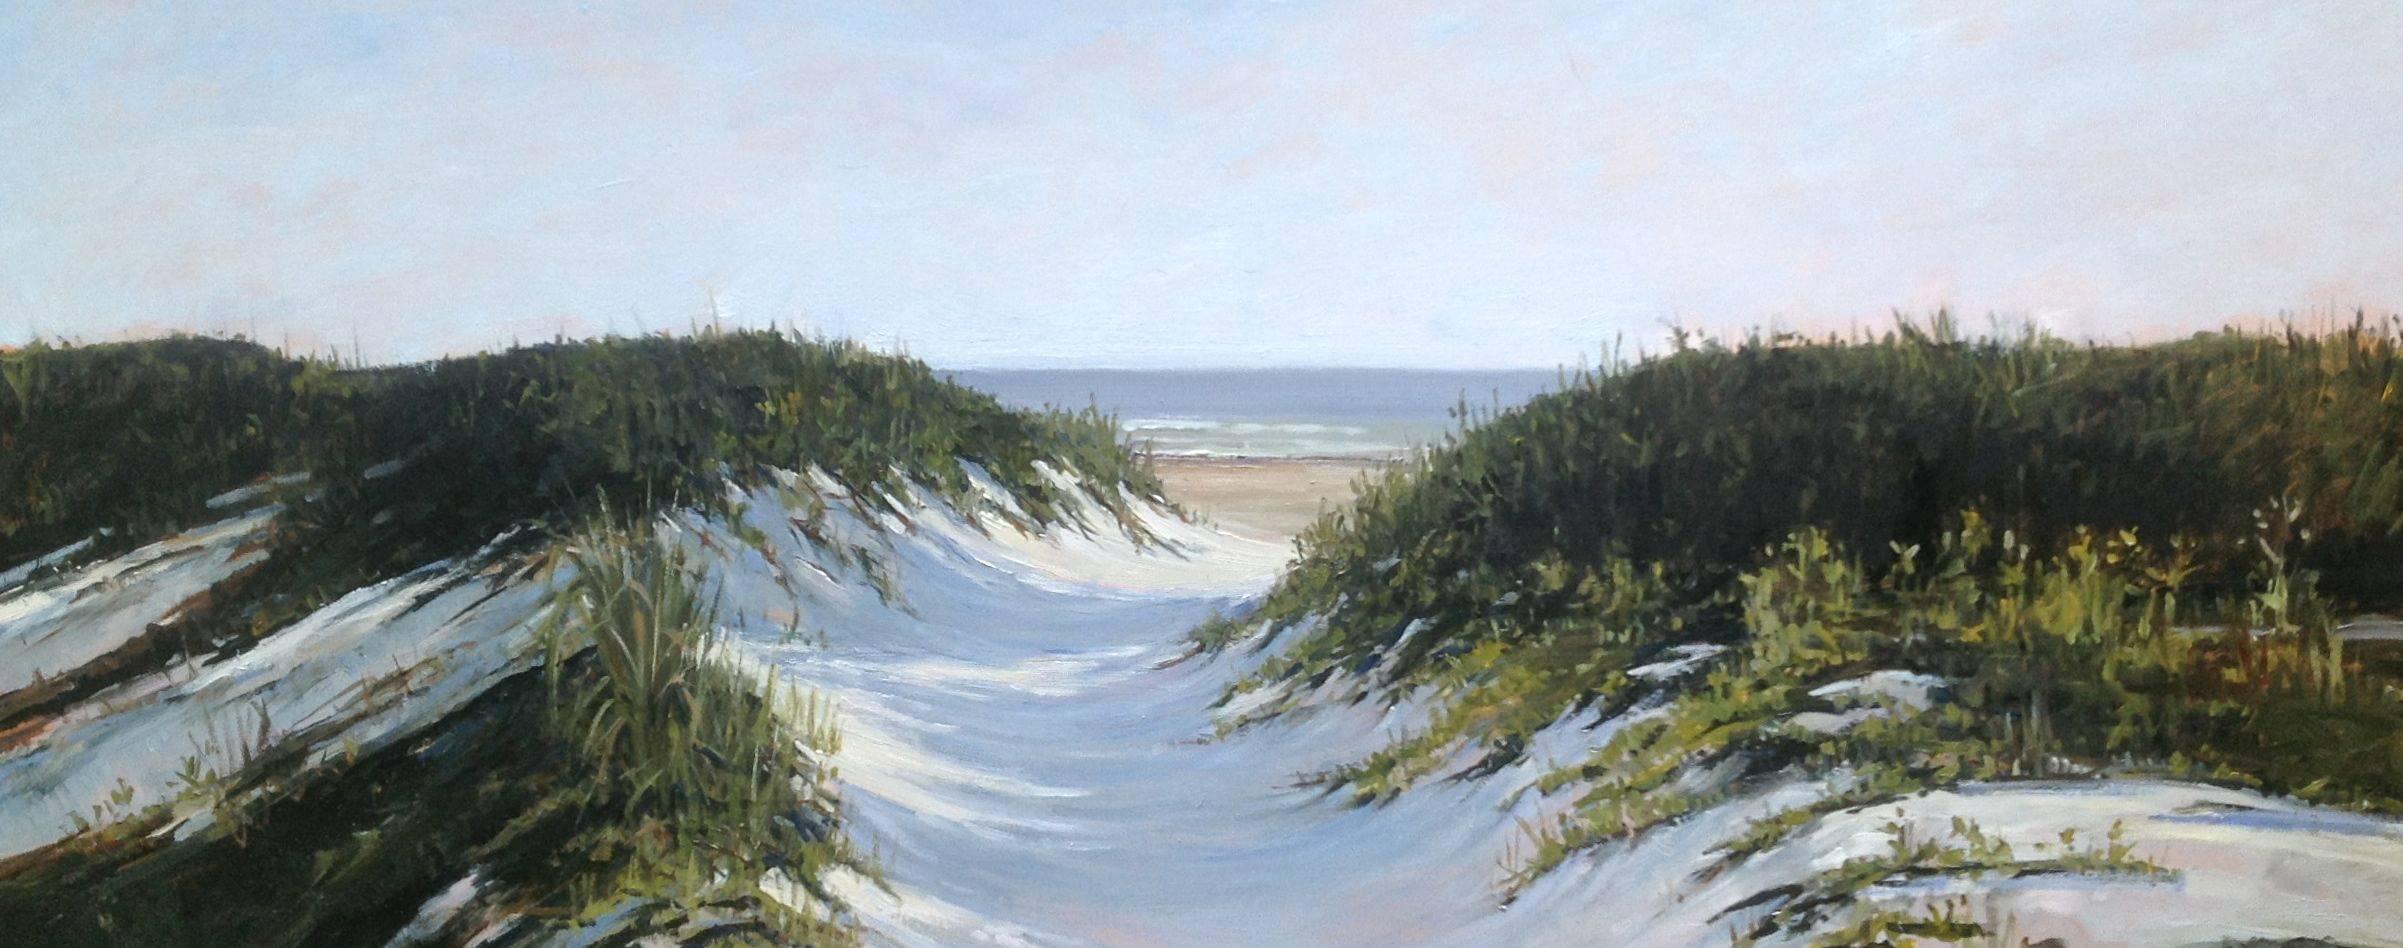 Emily Buchanan Landscape Painting - The Dunes, Oil on Panel, Signed Buchanan, American Contemporary